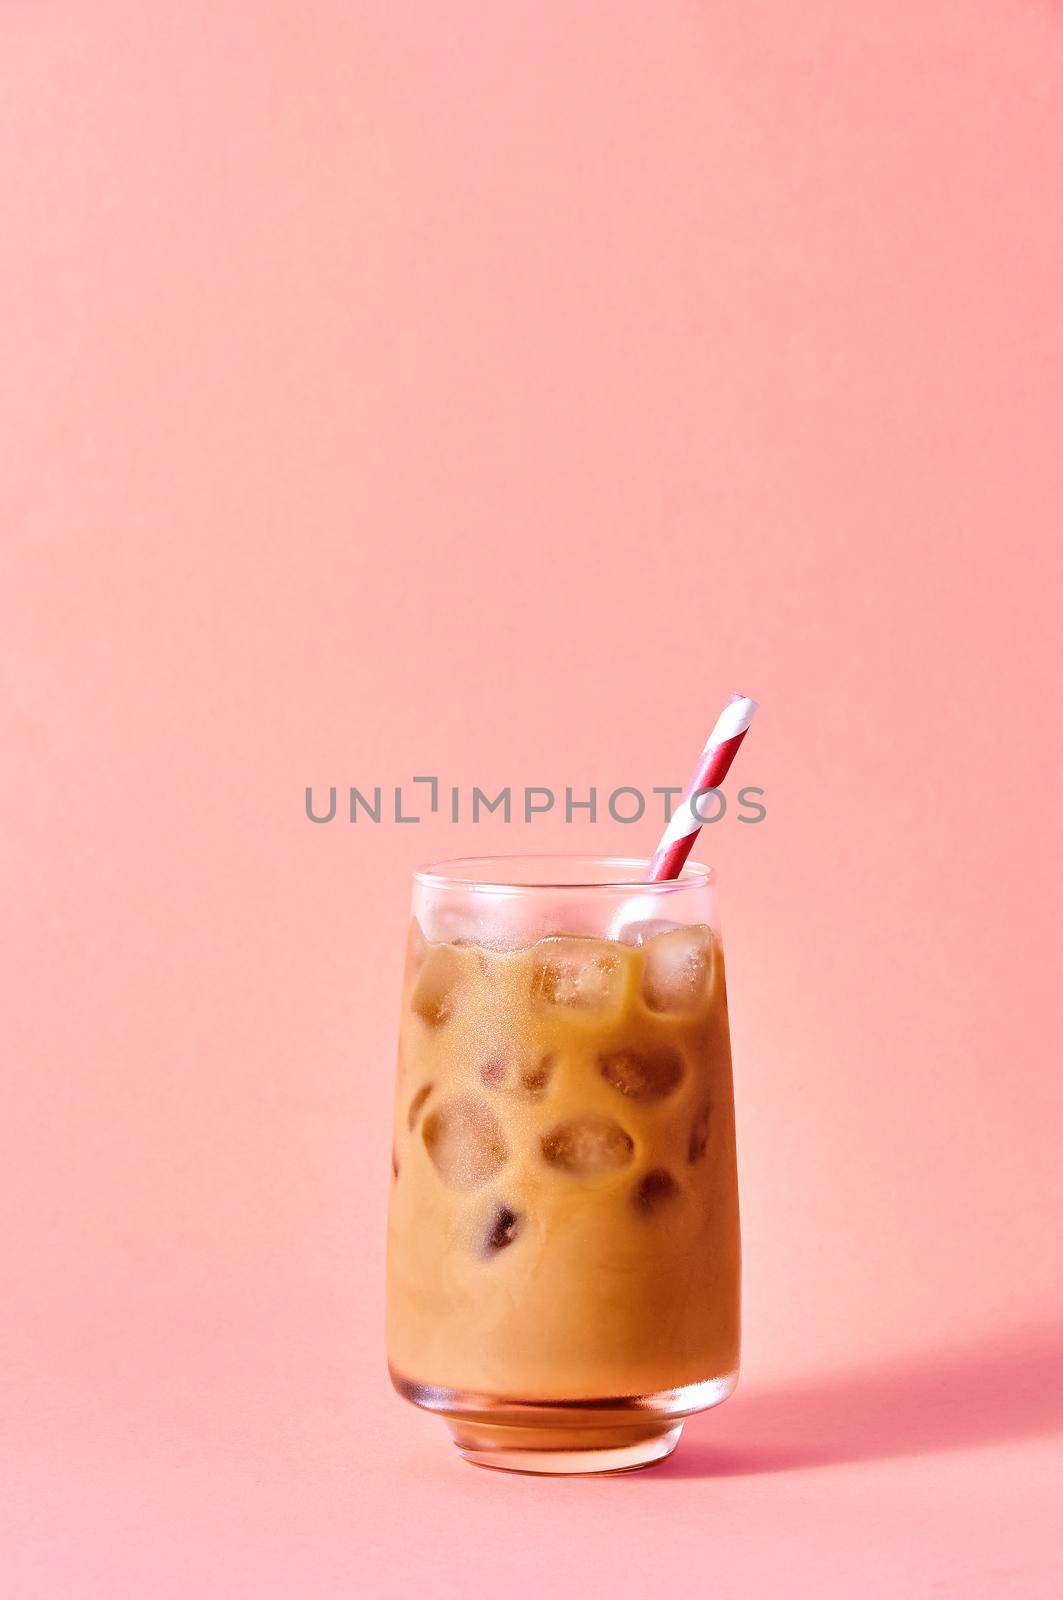 Iced Coffee in Tall Glasses on Pink Background. Concept Refreshing Summer Drink.